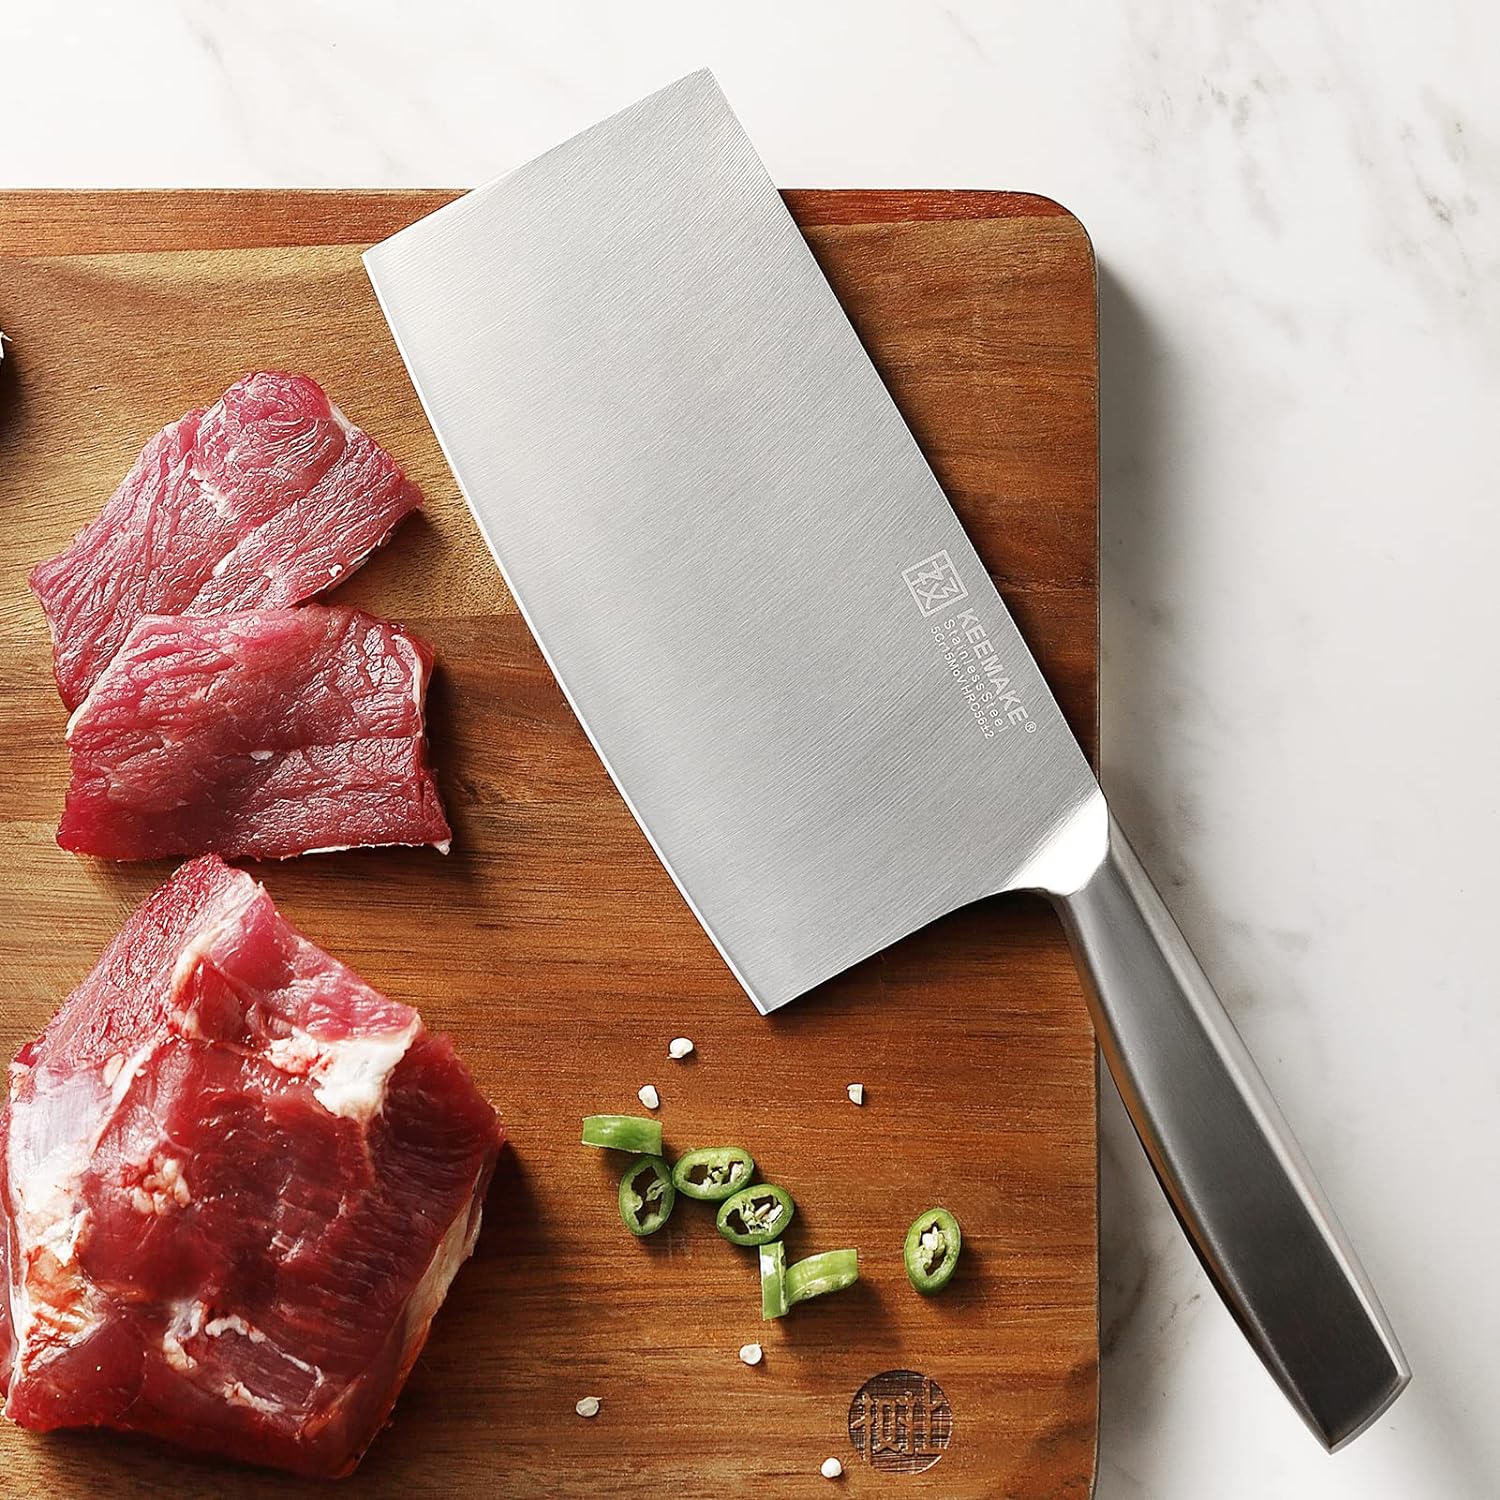 KEEMAKE Chinese Cleaver,  kitchen knife high carbon stainless steel 1.4116 for meat cutting